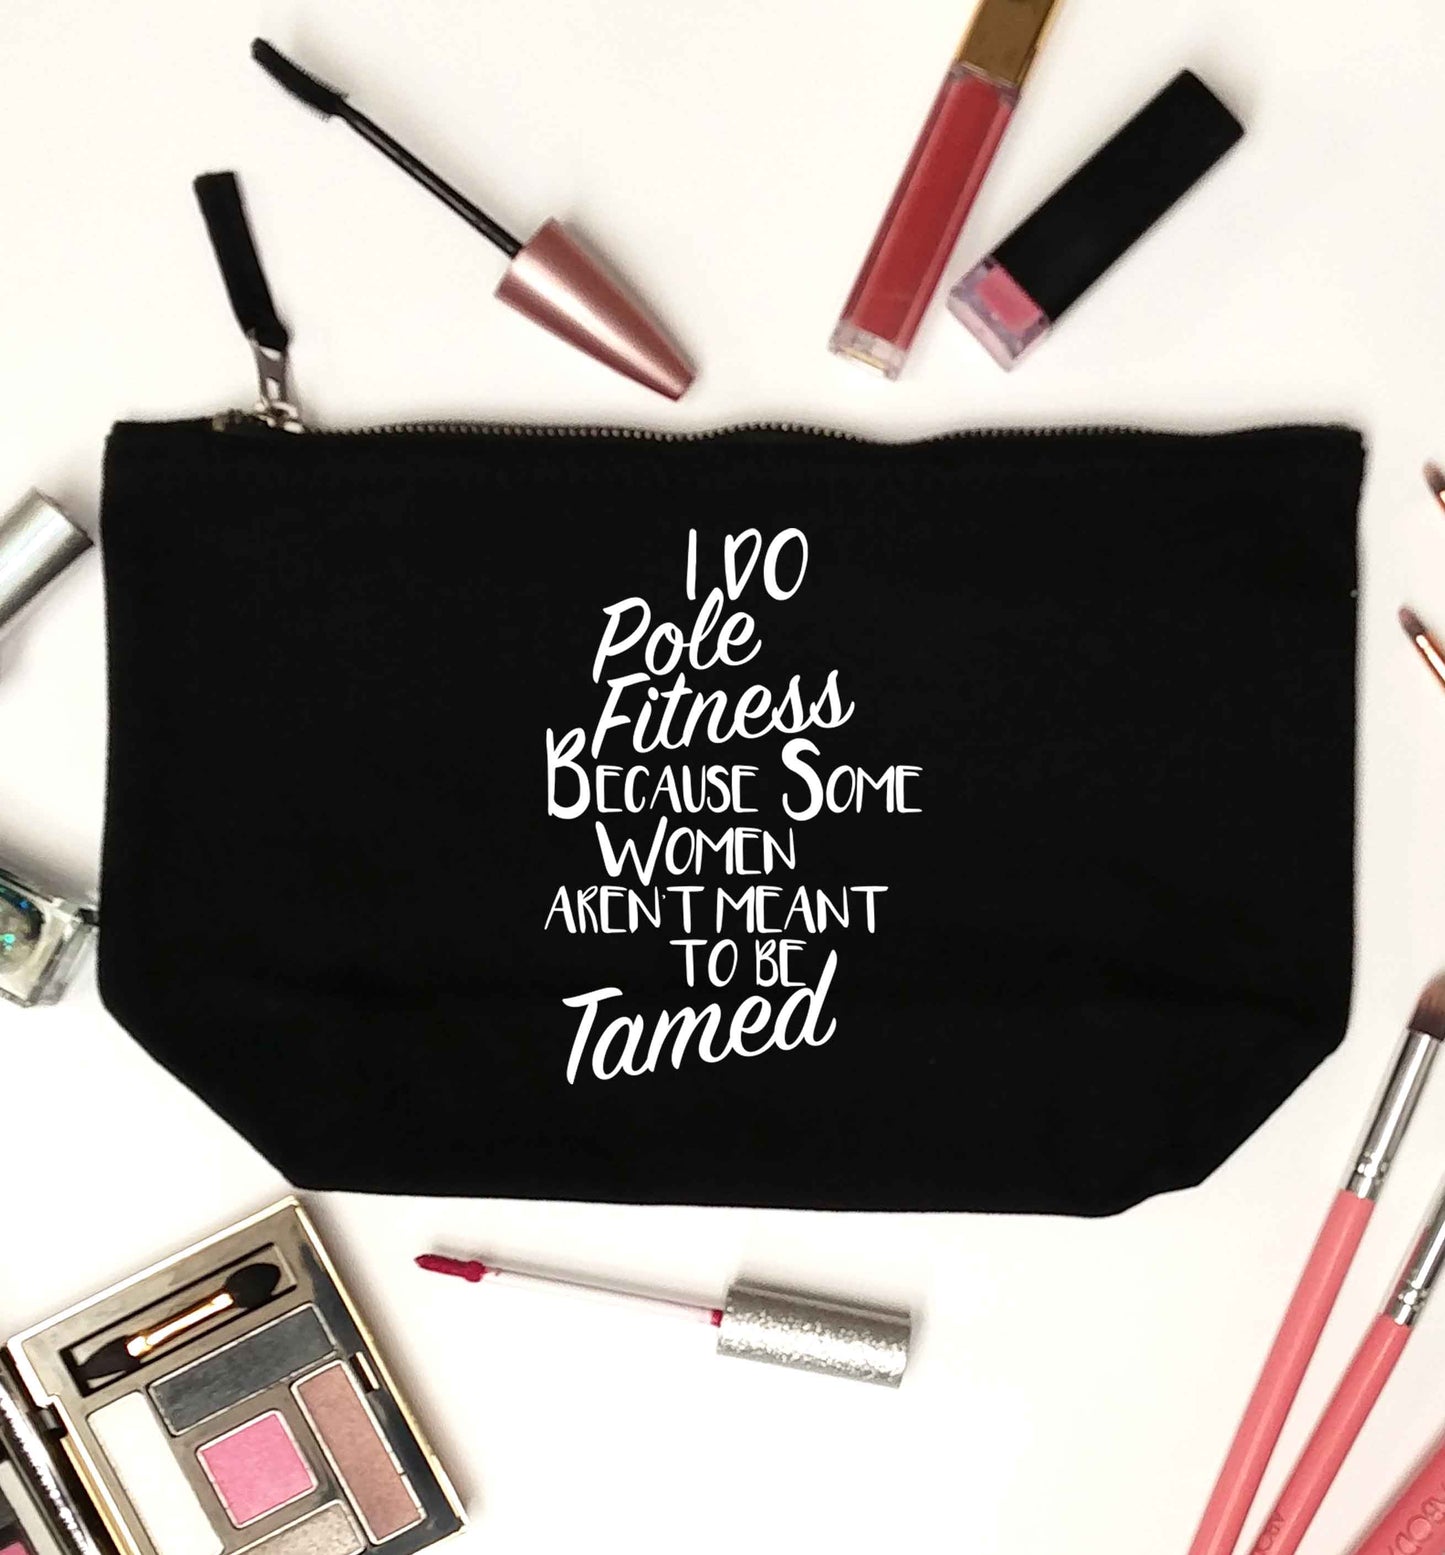 I do pole fitness because some women aren't meant to be tamed black makeup bag